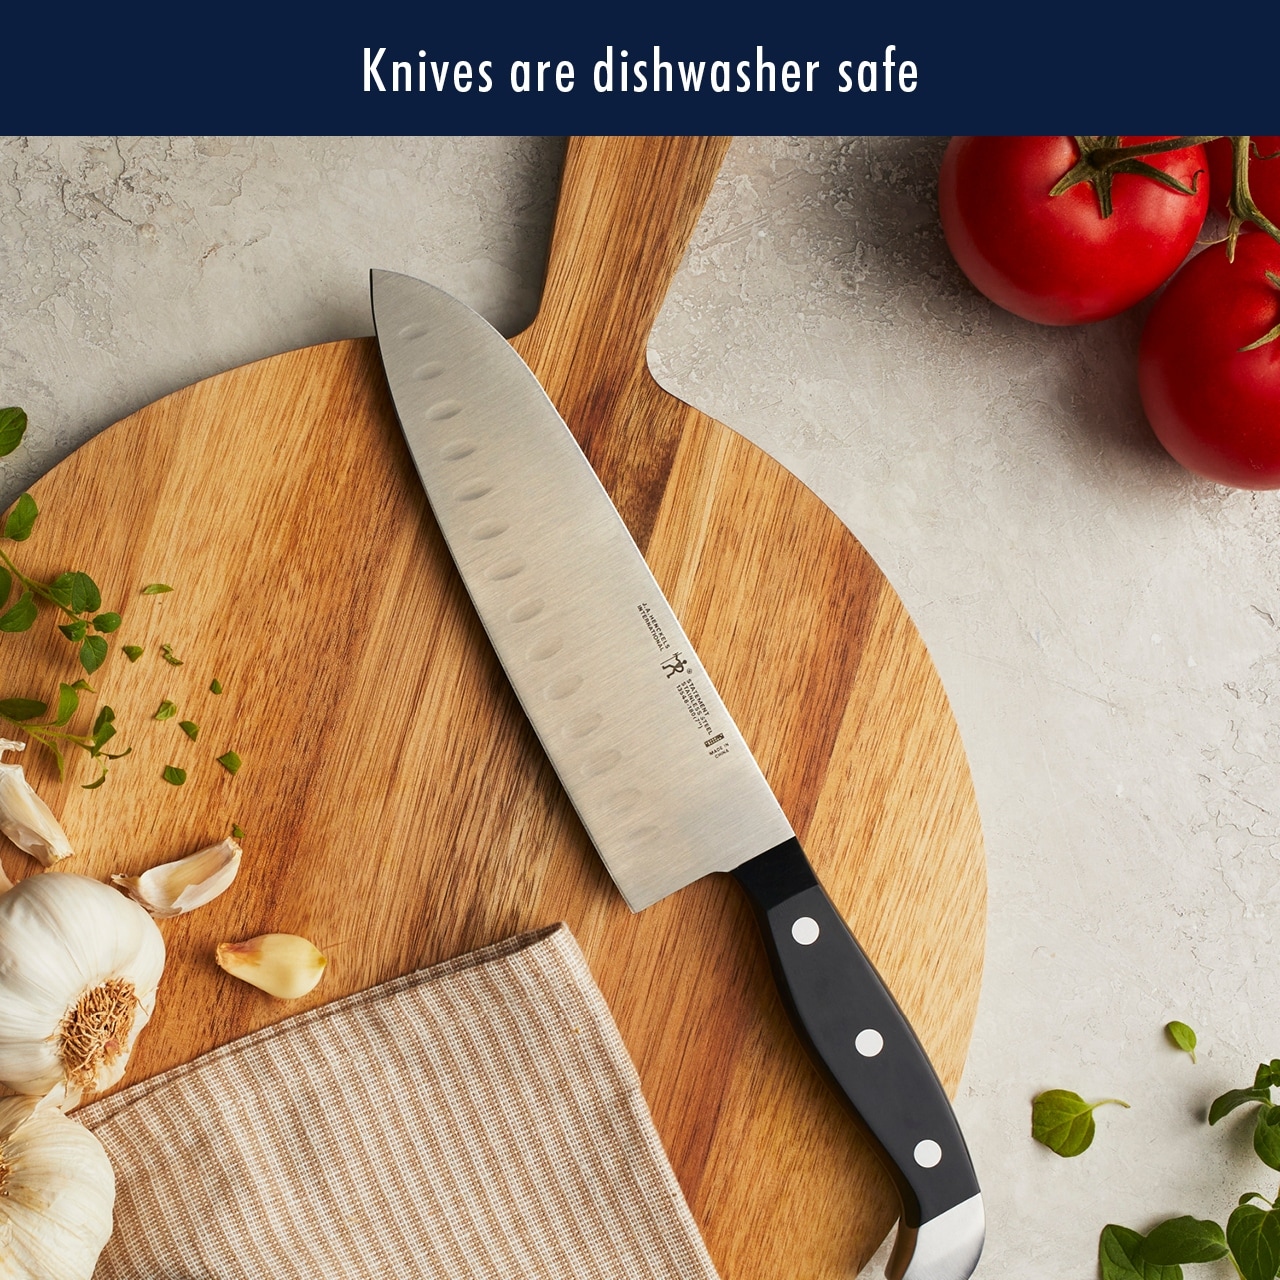 https://ak1.ostkcdn.com/images/products/is/images/direct/c6dfa81be2778d030f4990c9d47084046ab1166d/HENCKELS-Statement-Self-Sharpening-Knife-Set-with-Block%2C-Chef-Knife%2C-Paring-Knife%2C-Bread-Knife%2C-Steak-Knife%2C-14-piece.jpg